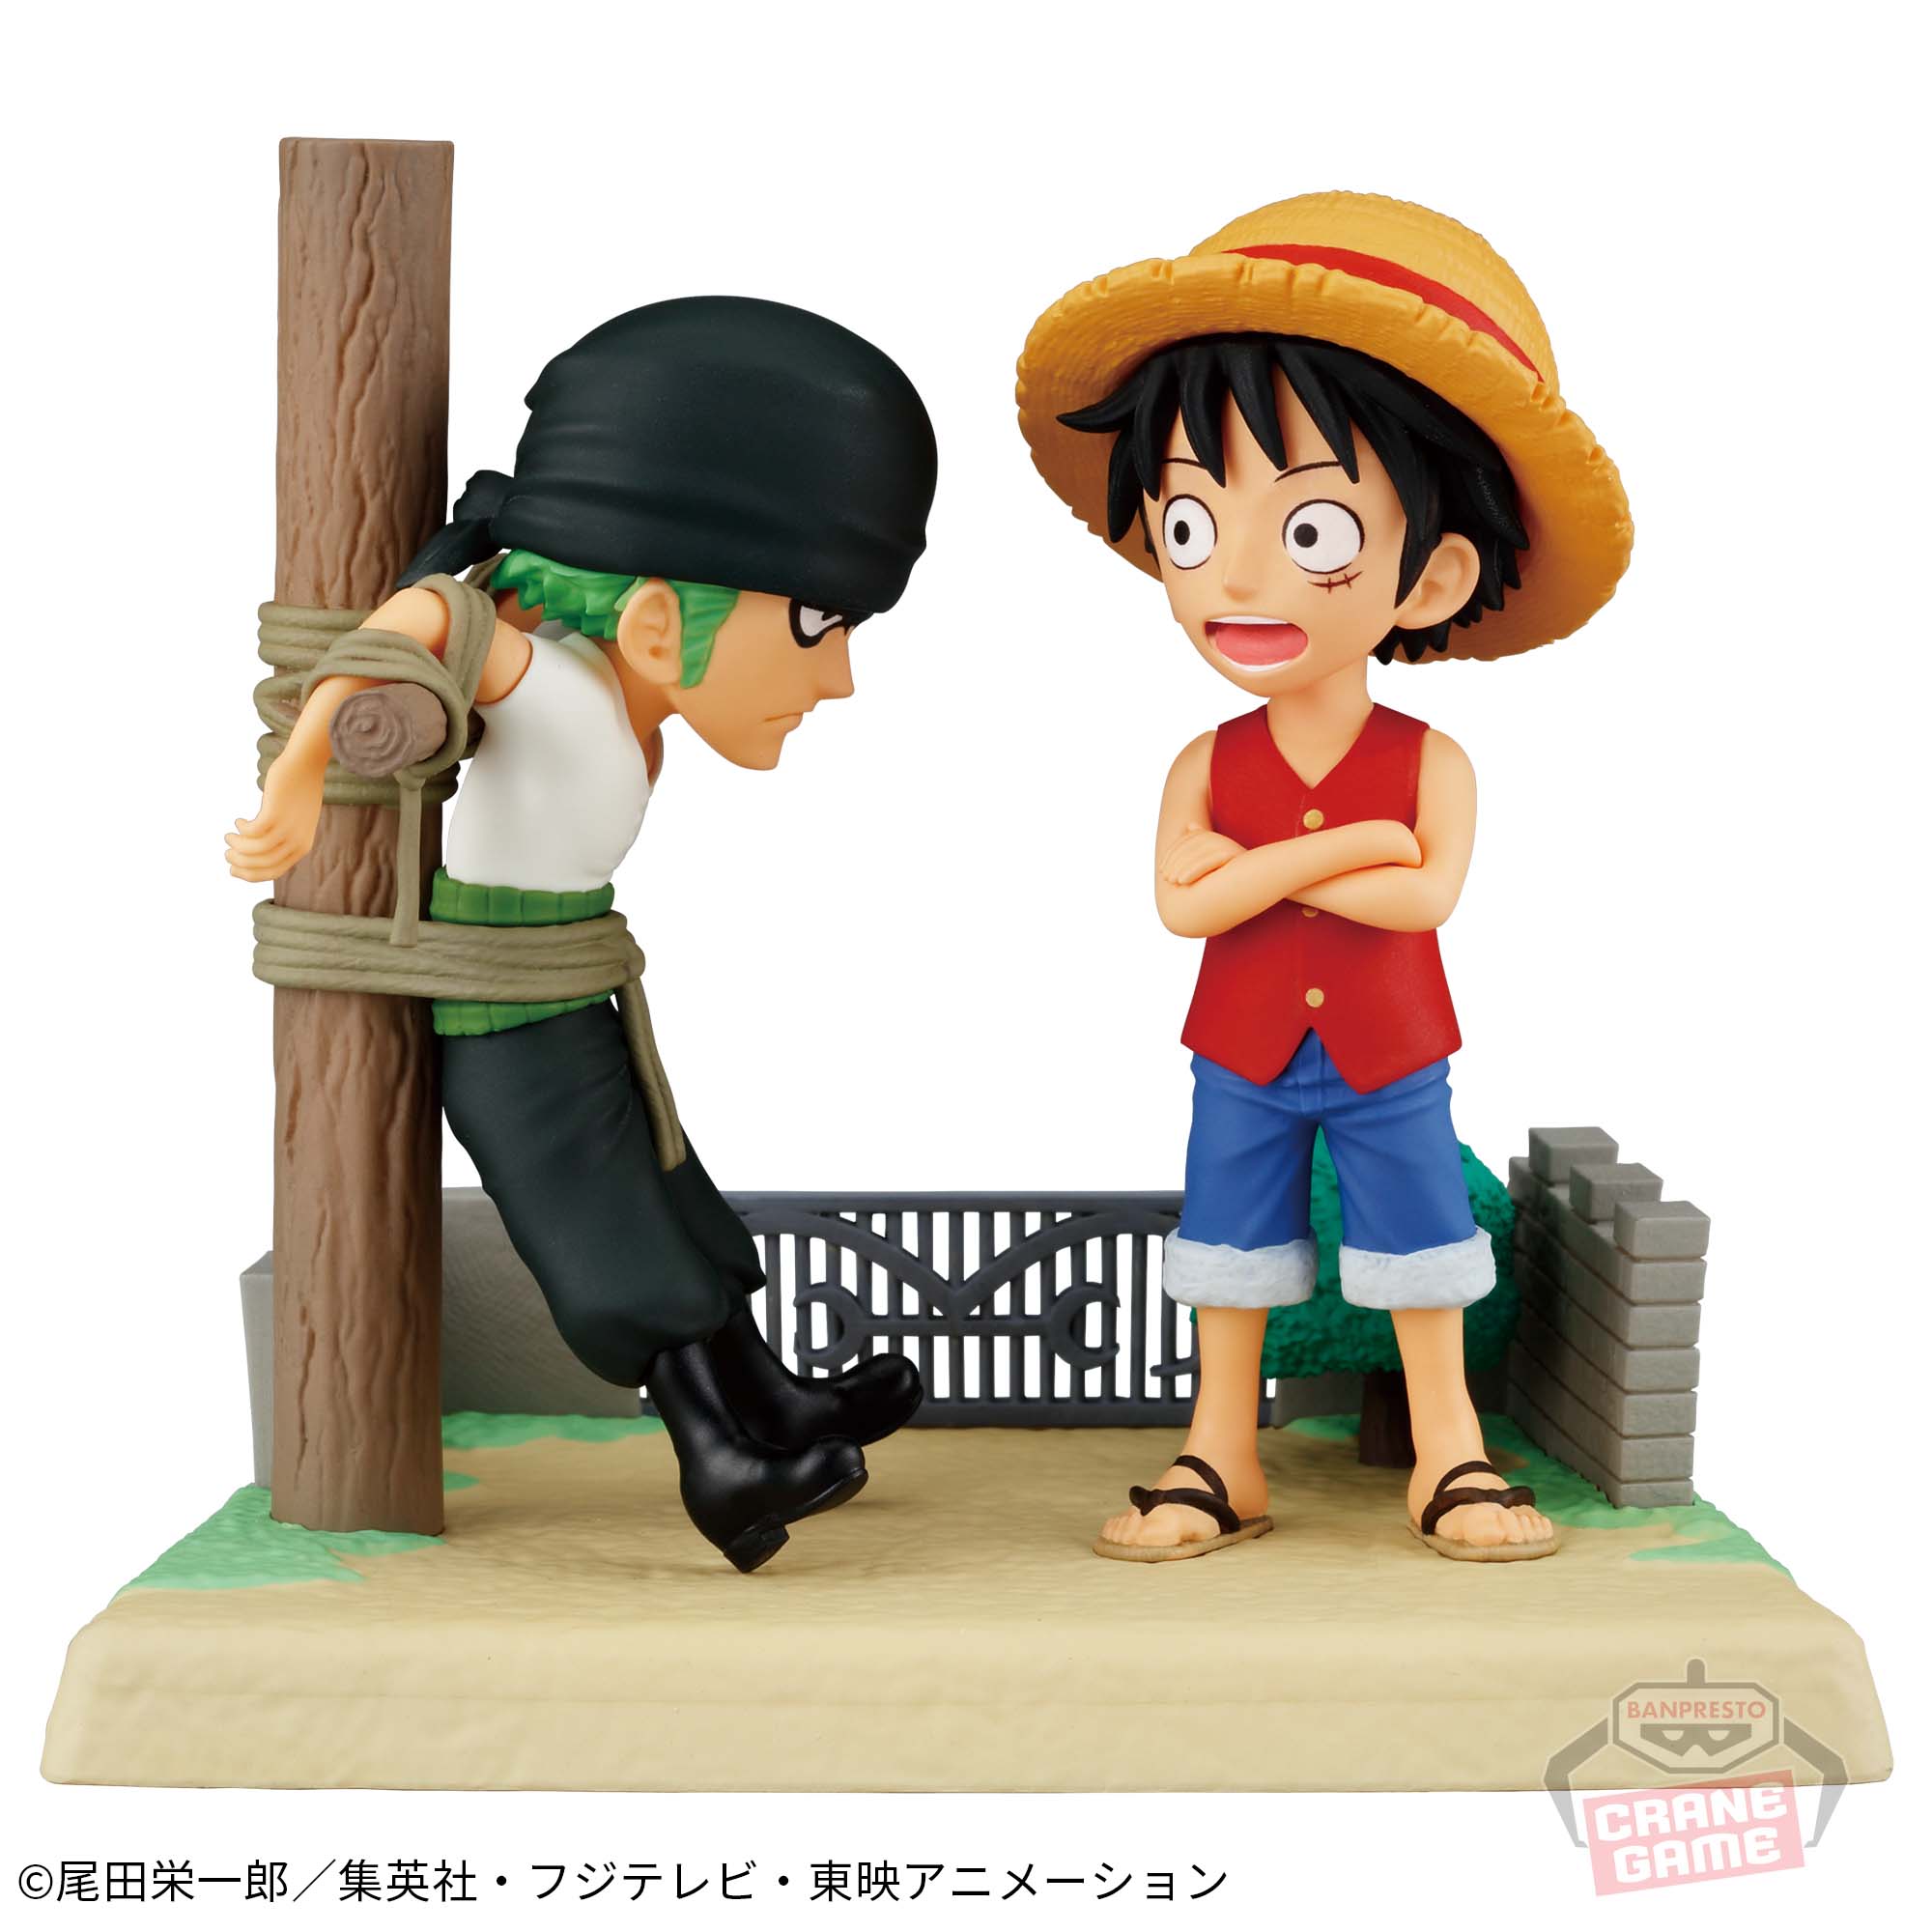 ONE PIECE WORLD COLLECTABLE FIGURE LOG STORIES -MONKEY D. LUFFY & RORONOA ZORO-